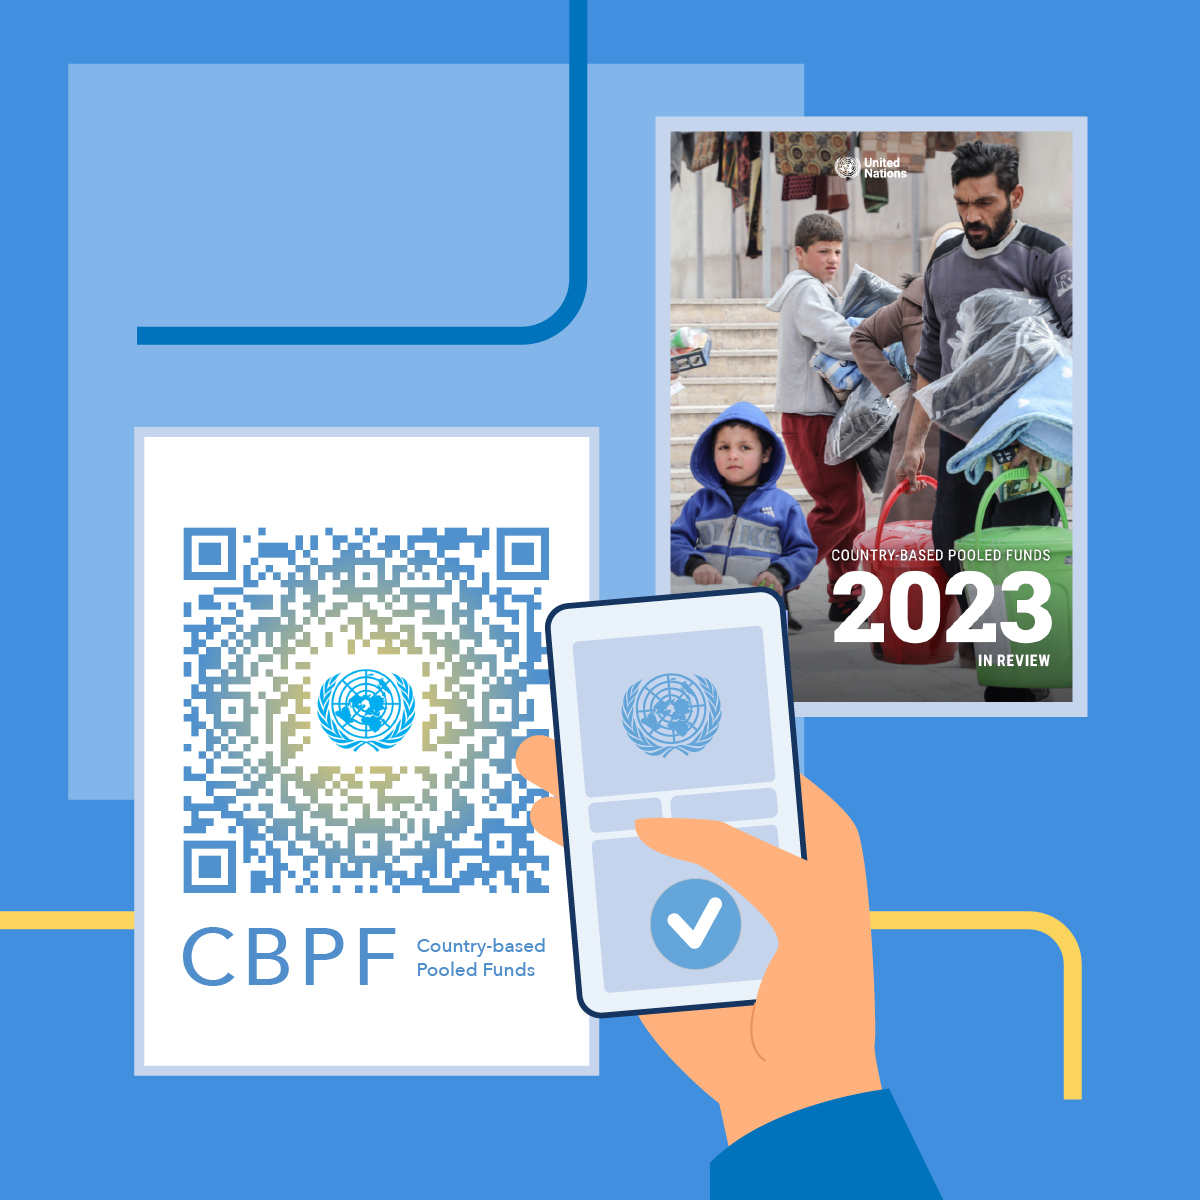 🤔How did @CBPFs life-saving humanitarian aid actually help those who needed it most in 2023? To learn more, you can now easily access our CBPFs 2023 in Review through the QR code below📱⤵️ #InvestInHumanity